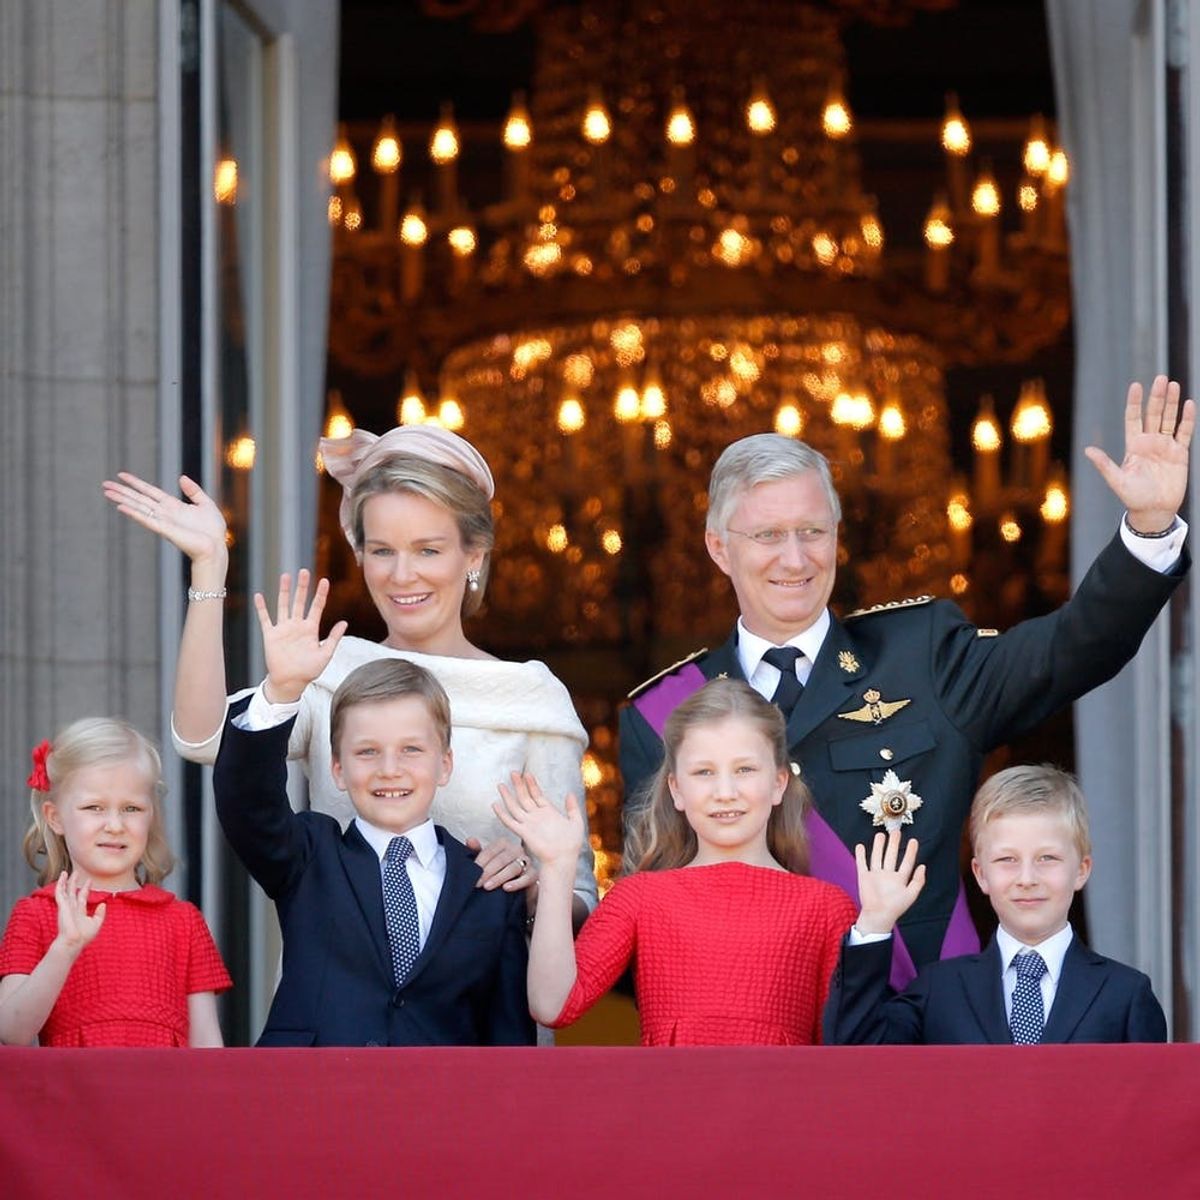 13 Royal Families Around the World That Aren’t the British Monarchy